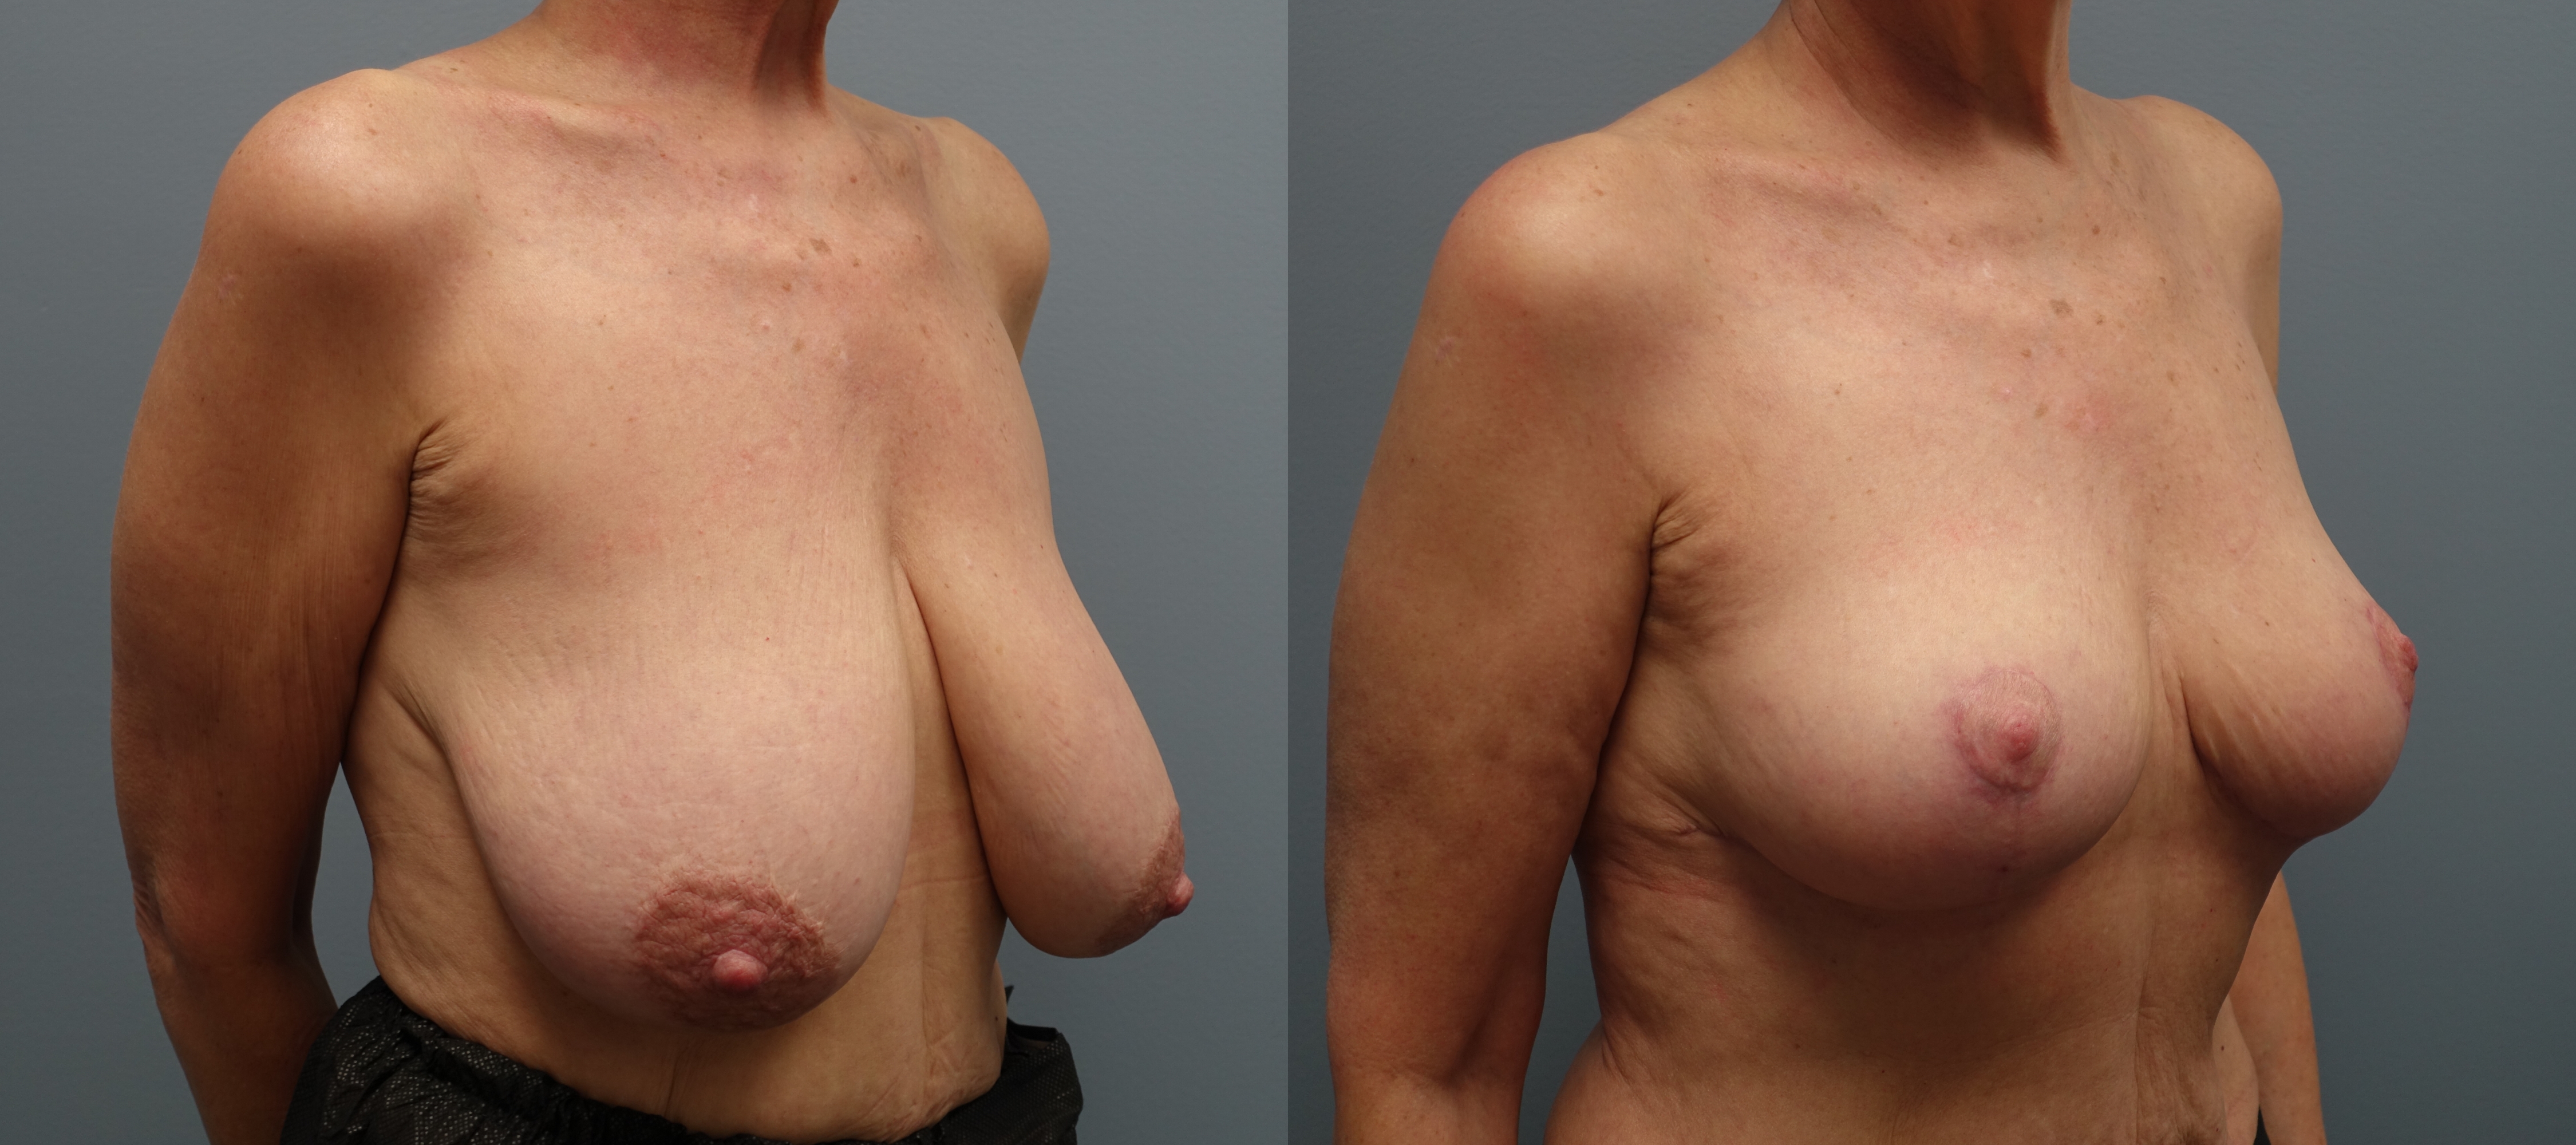 Breast Reduction. 